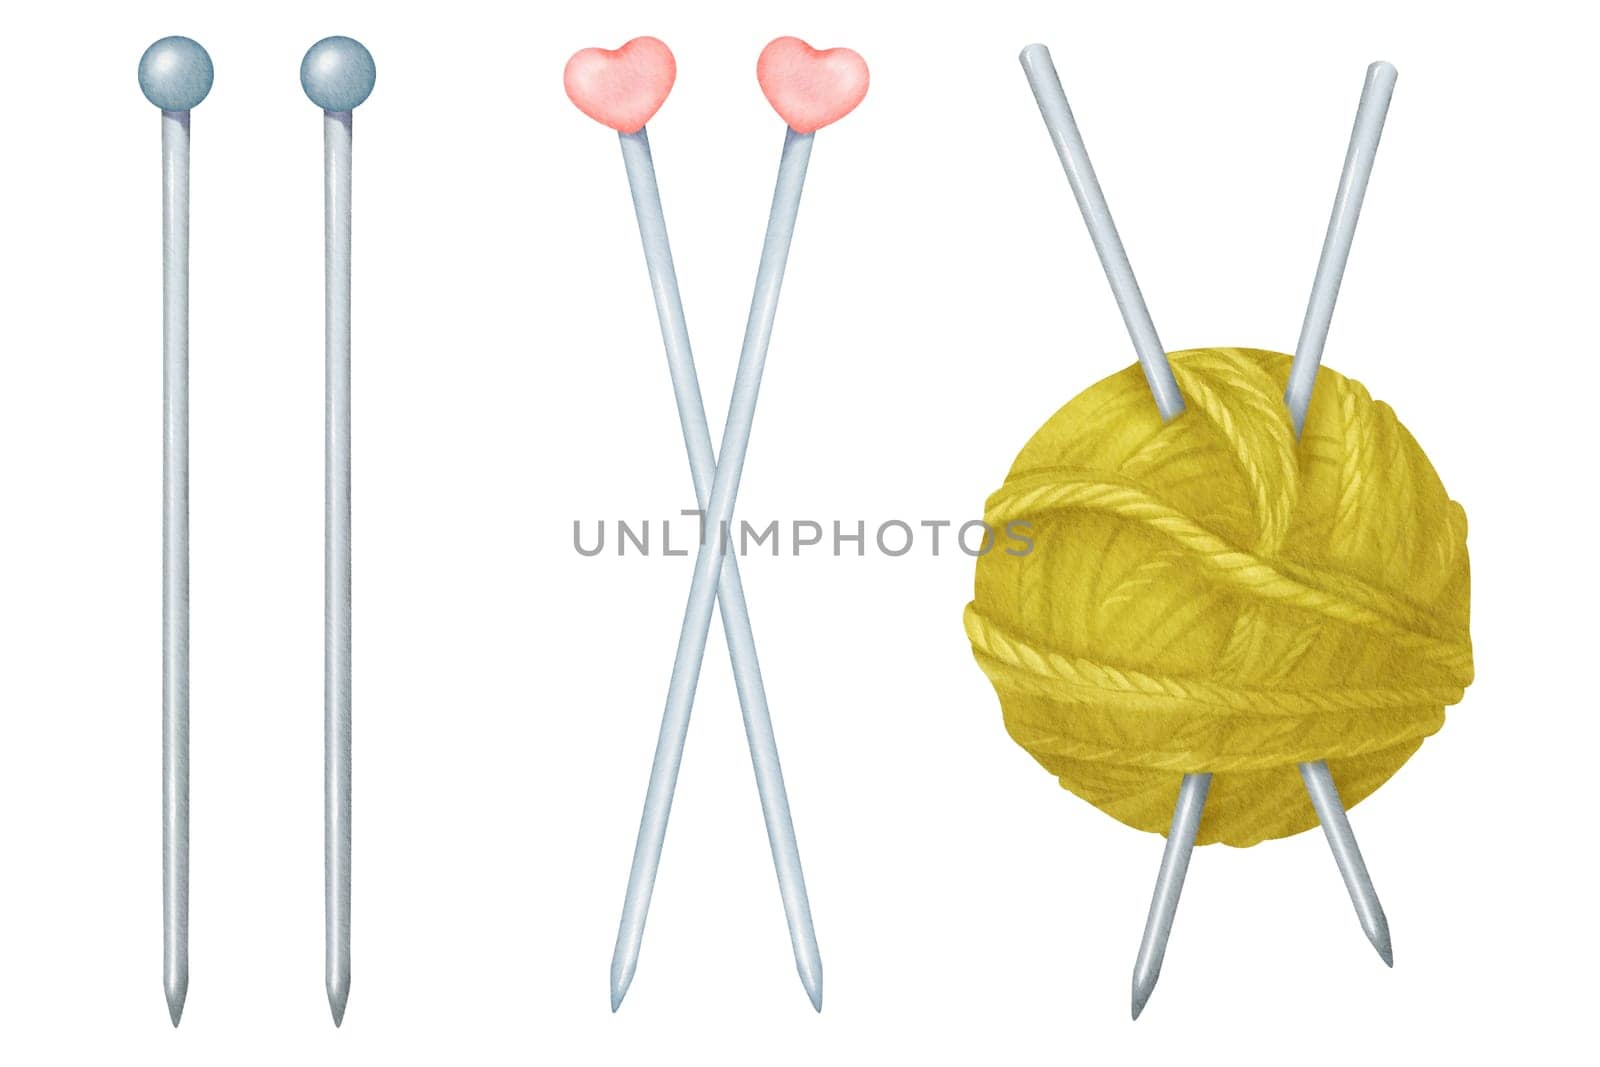 Watercolor set of knitting needles. Isolated objects featuring steel needles with round blue tips, adorned with pink plastic hearts. Crafting tools inserted into a ball of yarn. for needlework shops by Art_Mari_Ka